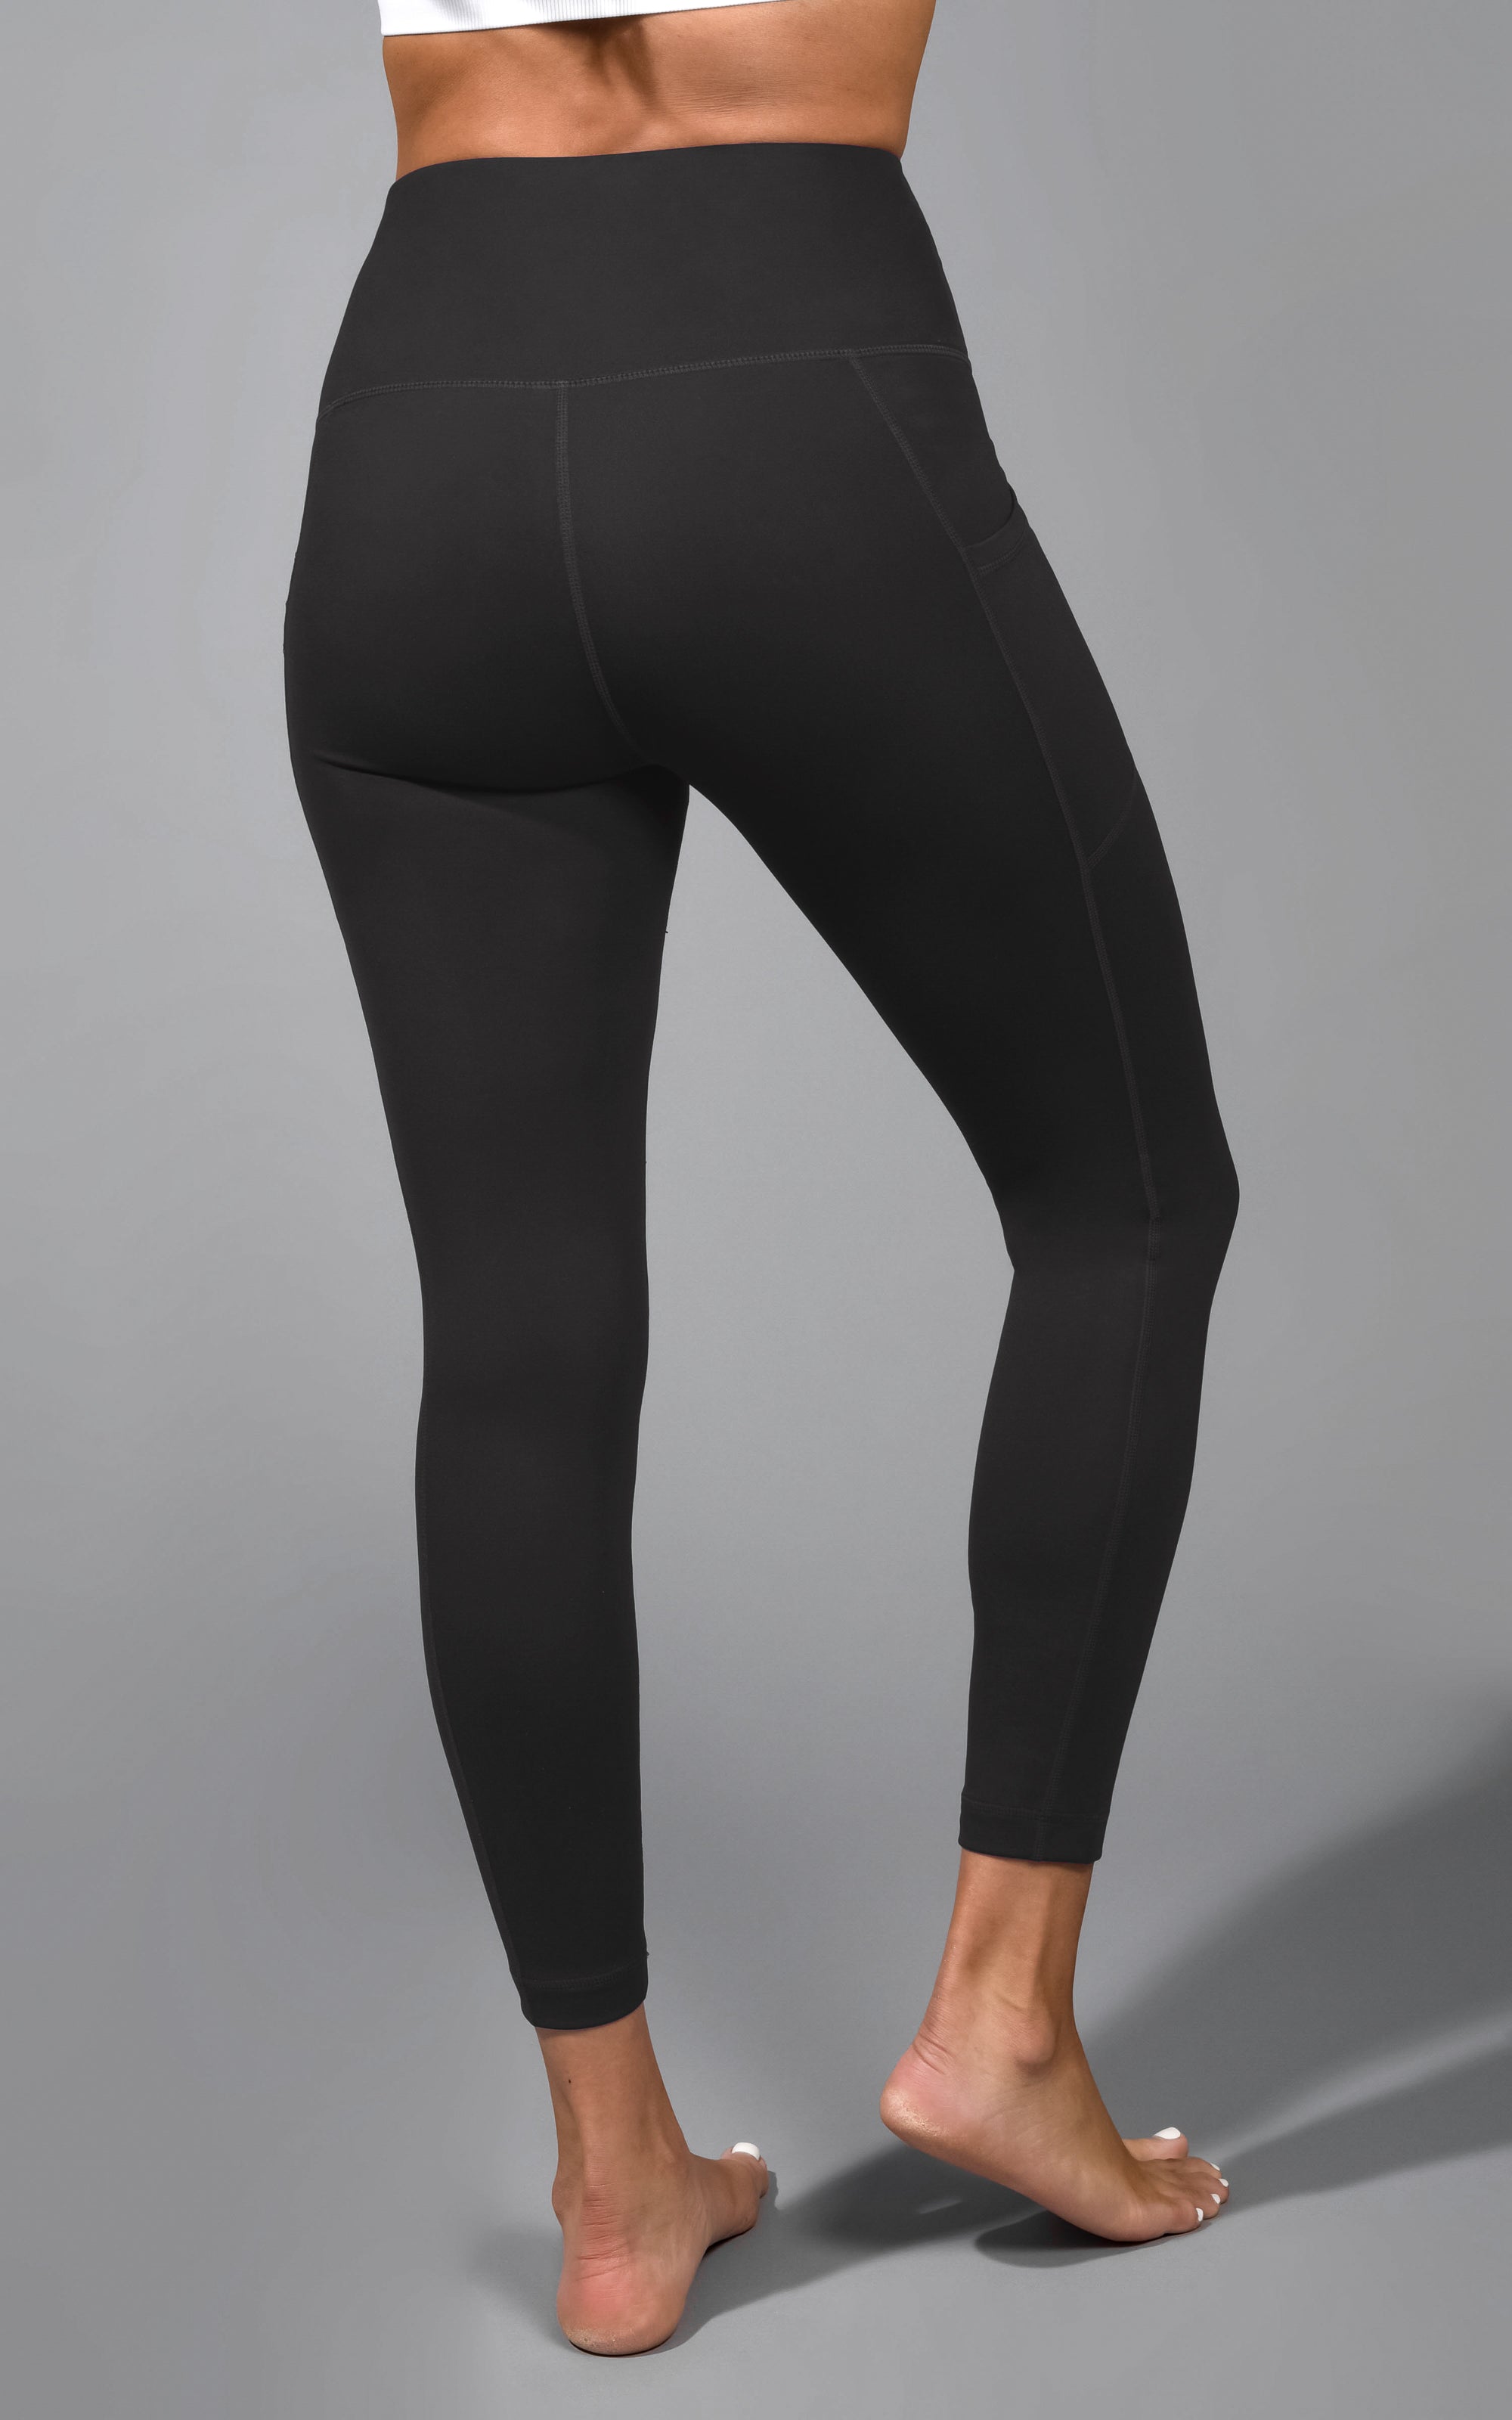 Yogalicious Lux High Waisted Pocket Legging - $14 (48% Off Retail